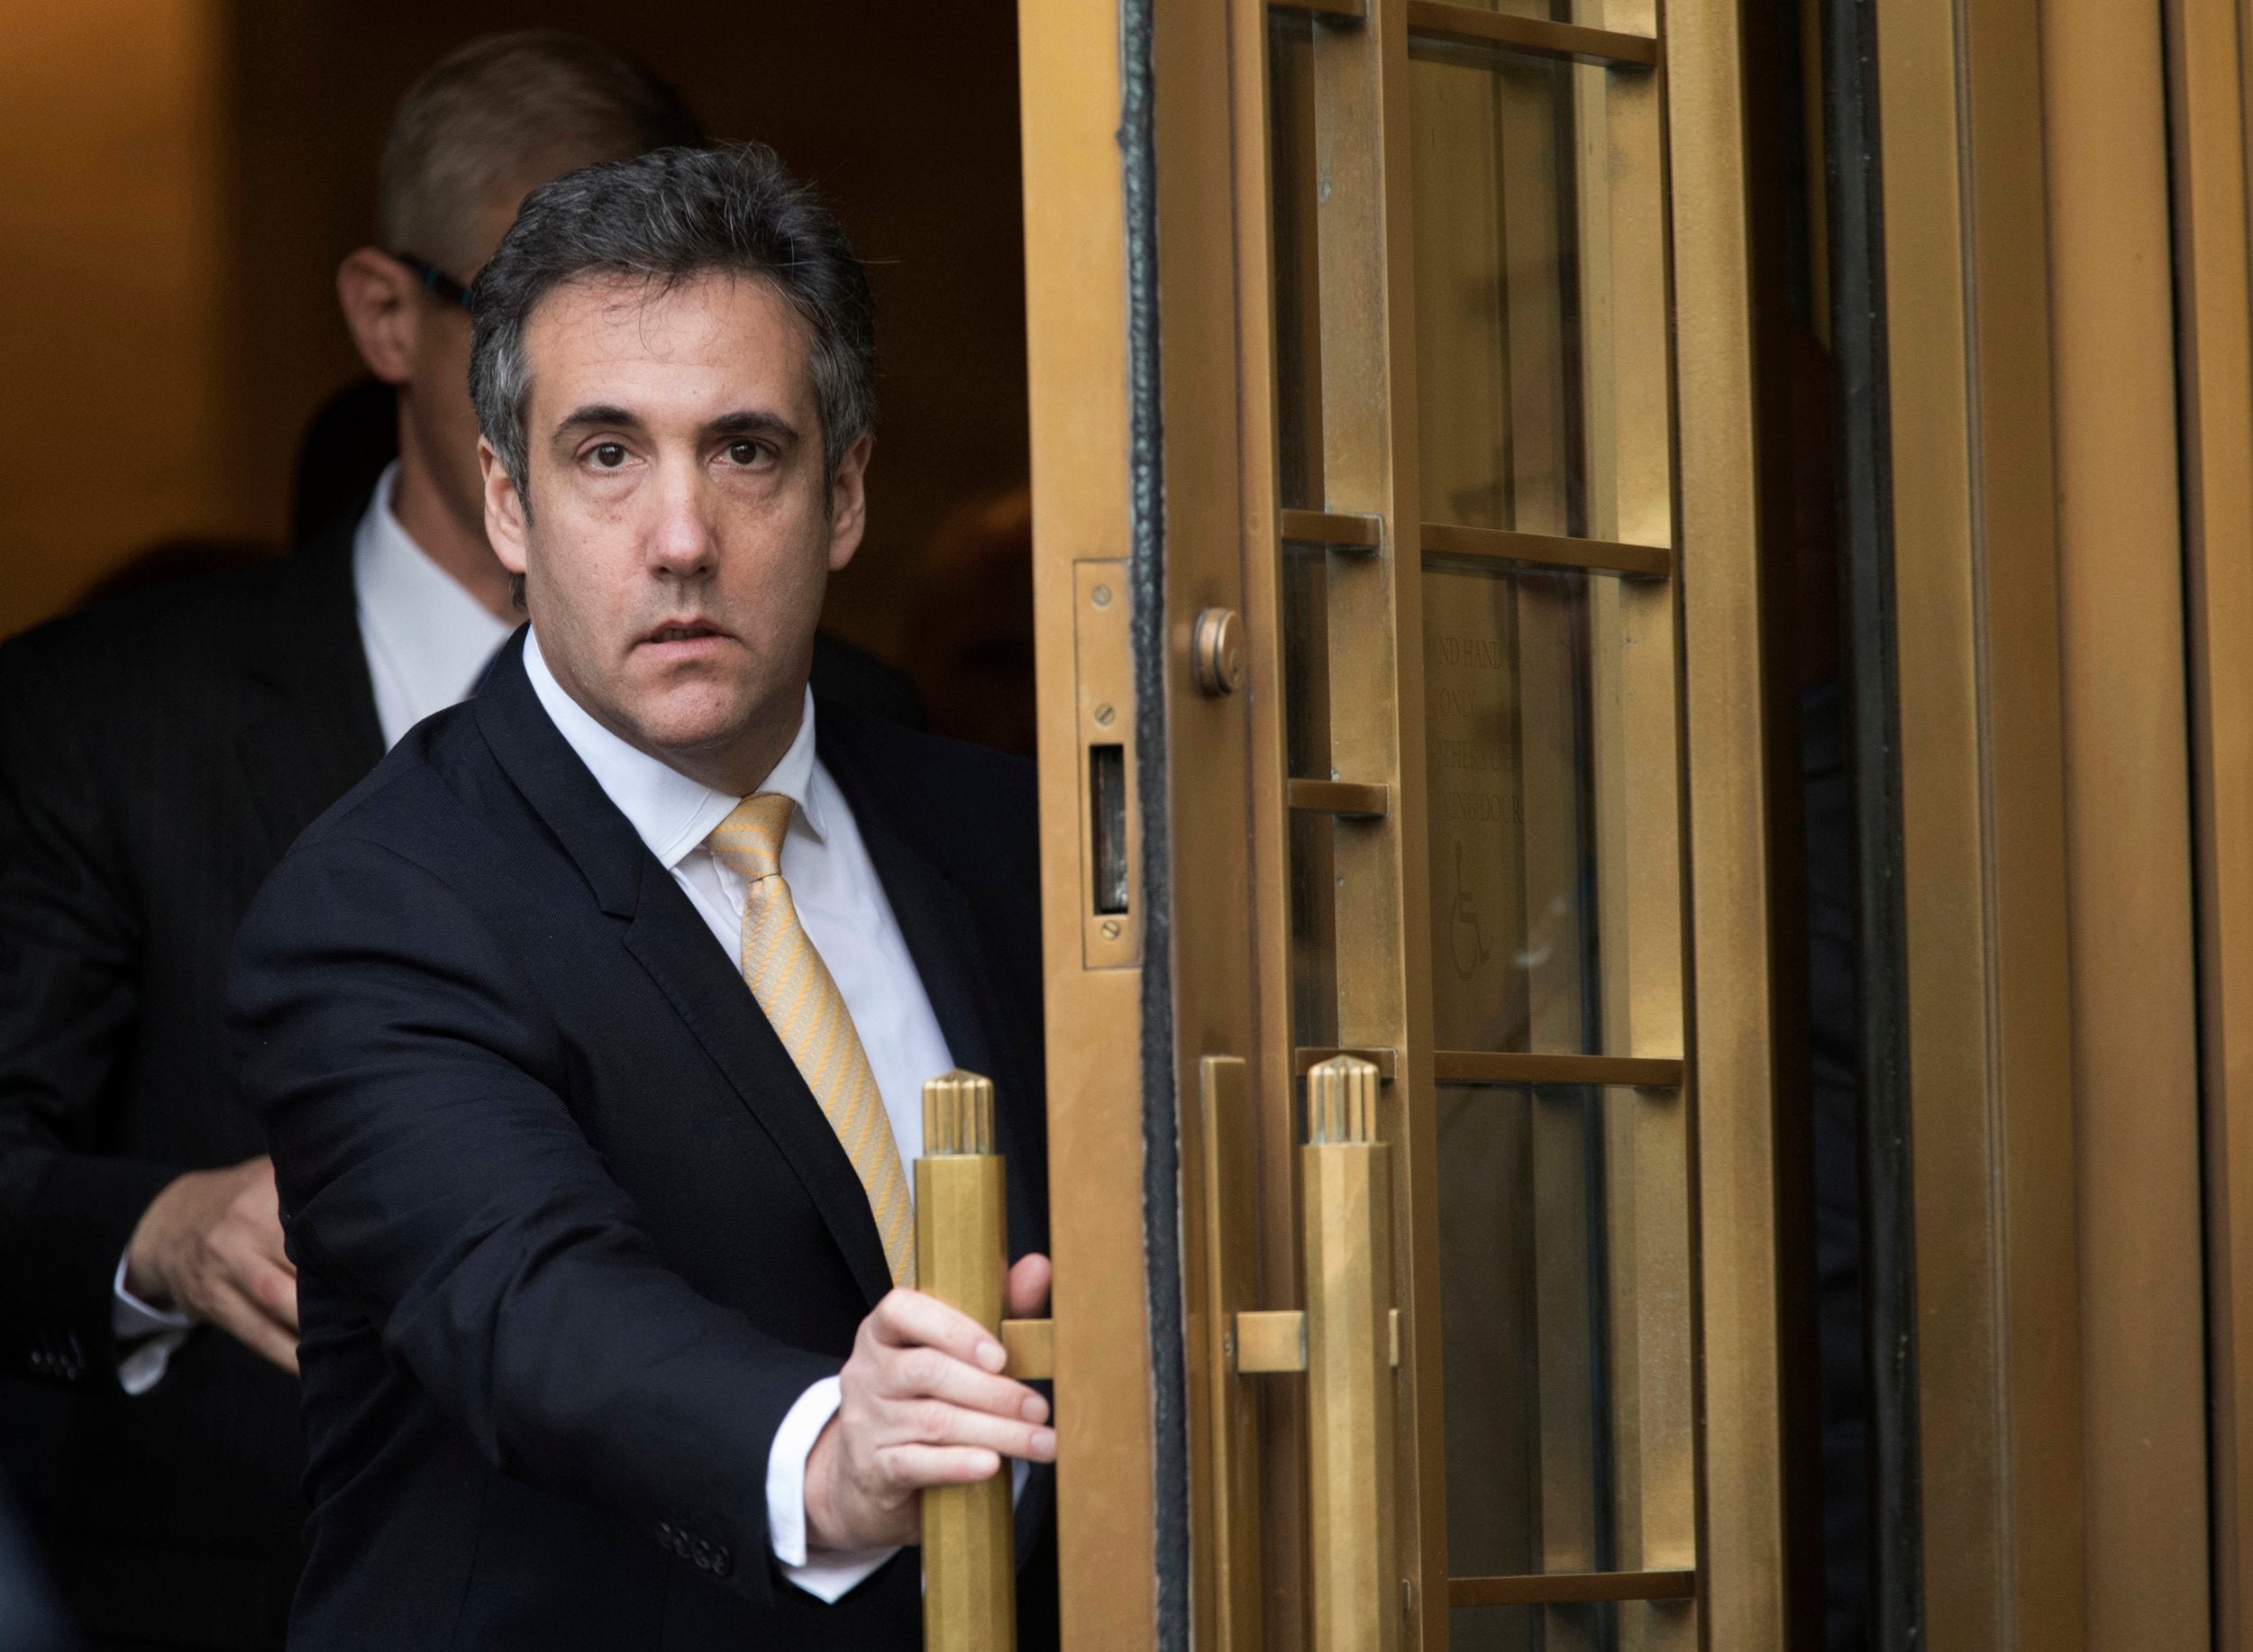 Mr Cohen was in the habit of recording phone conversations, and various prosecuting authorities have in their hands a wealth of information raided from his law firm and home already